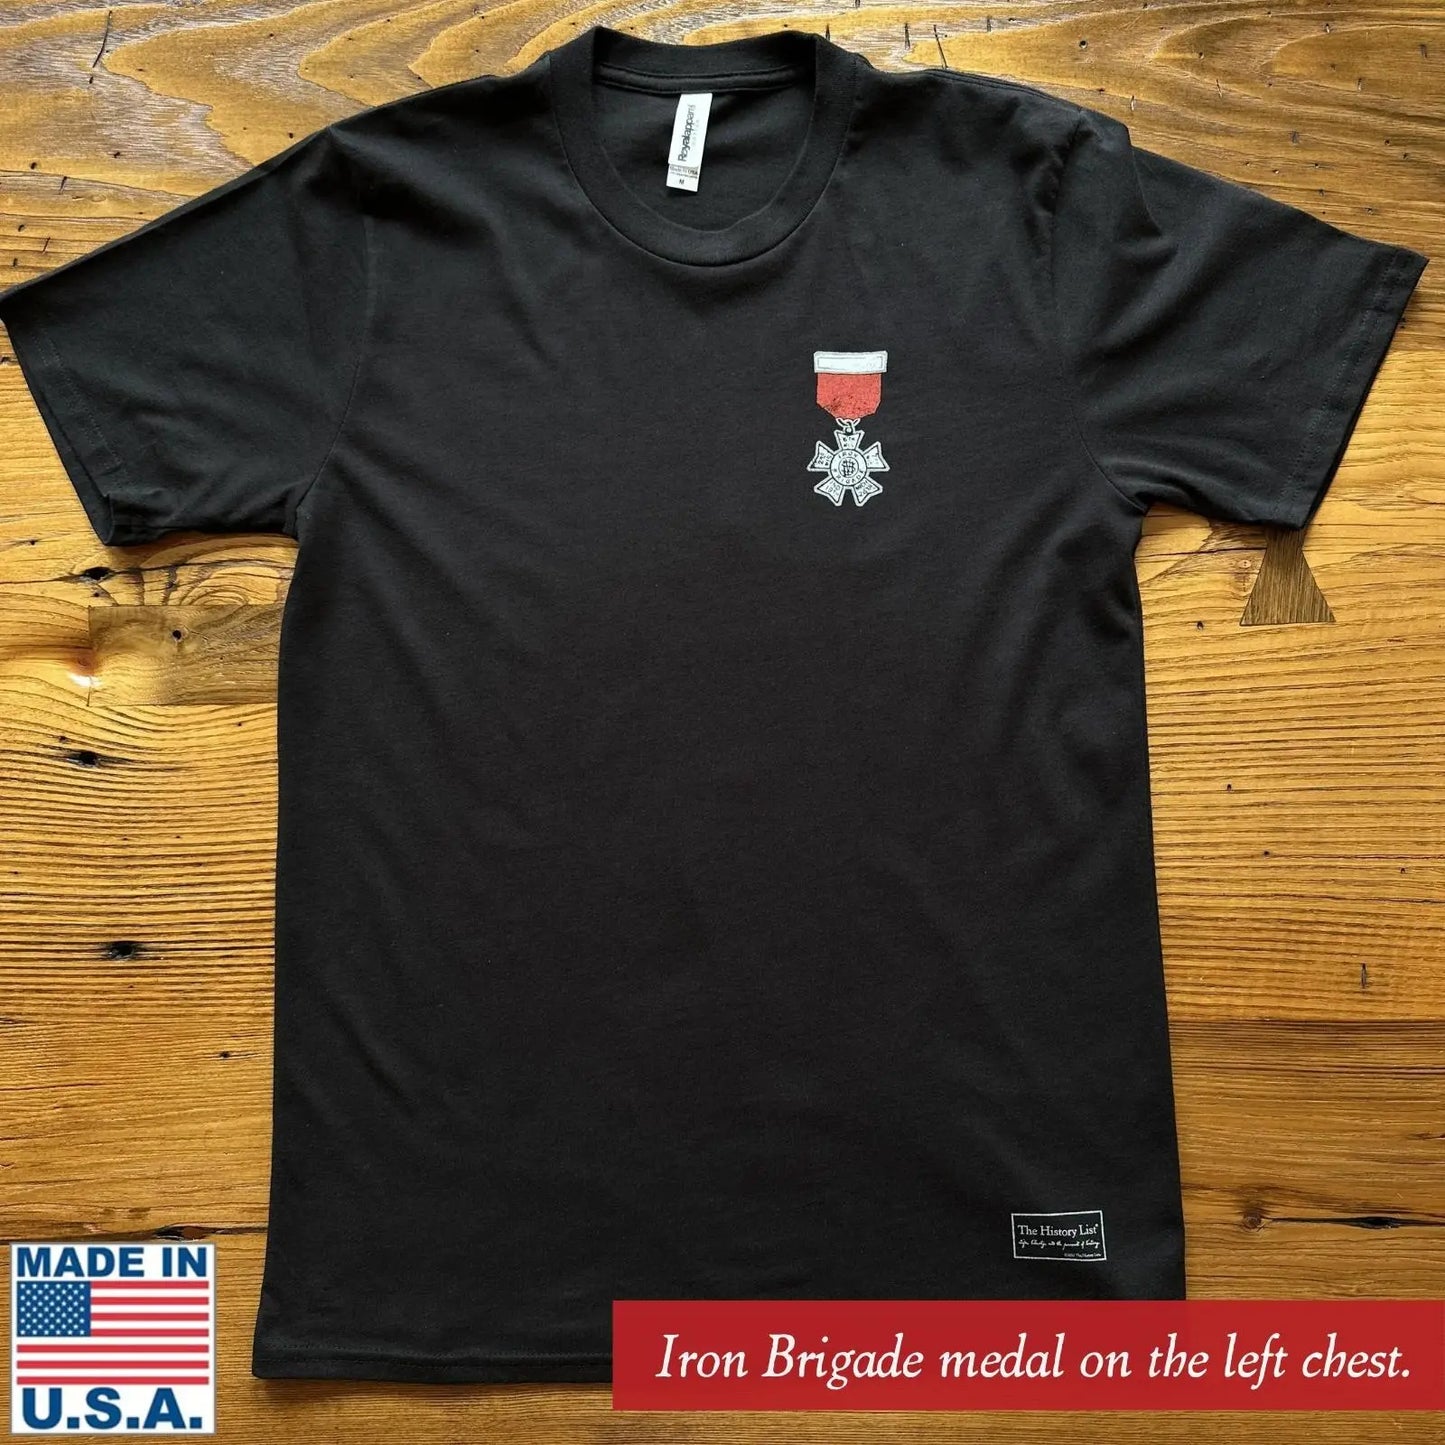 New front of The Civil War "Iron Brigade" Shirt Made in America from The History List store